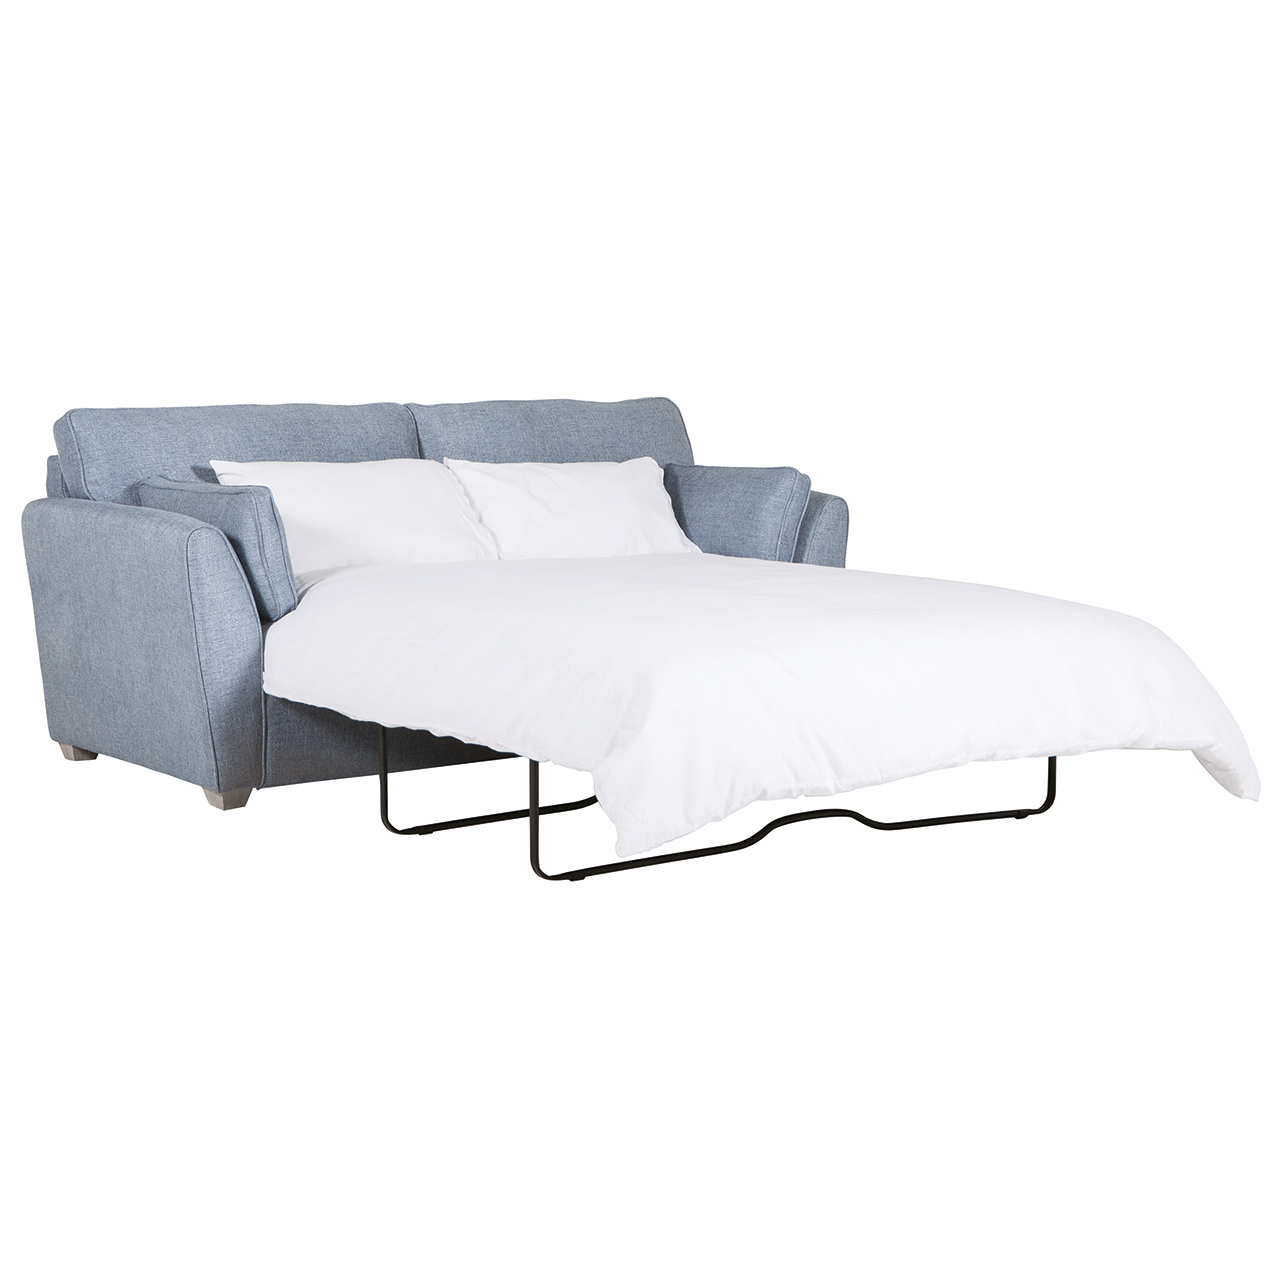 10-Second Sofa Bed